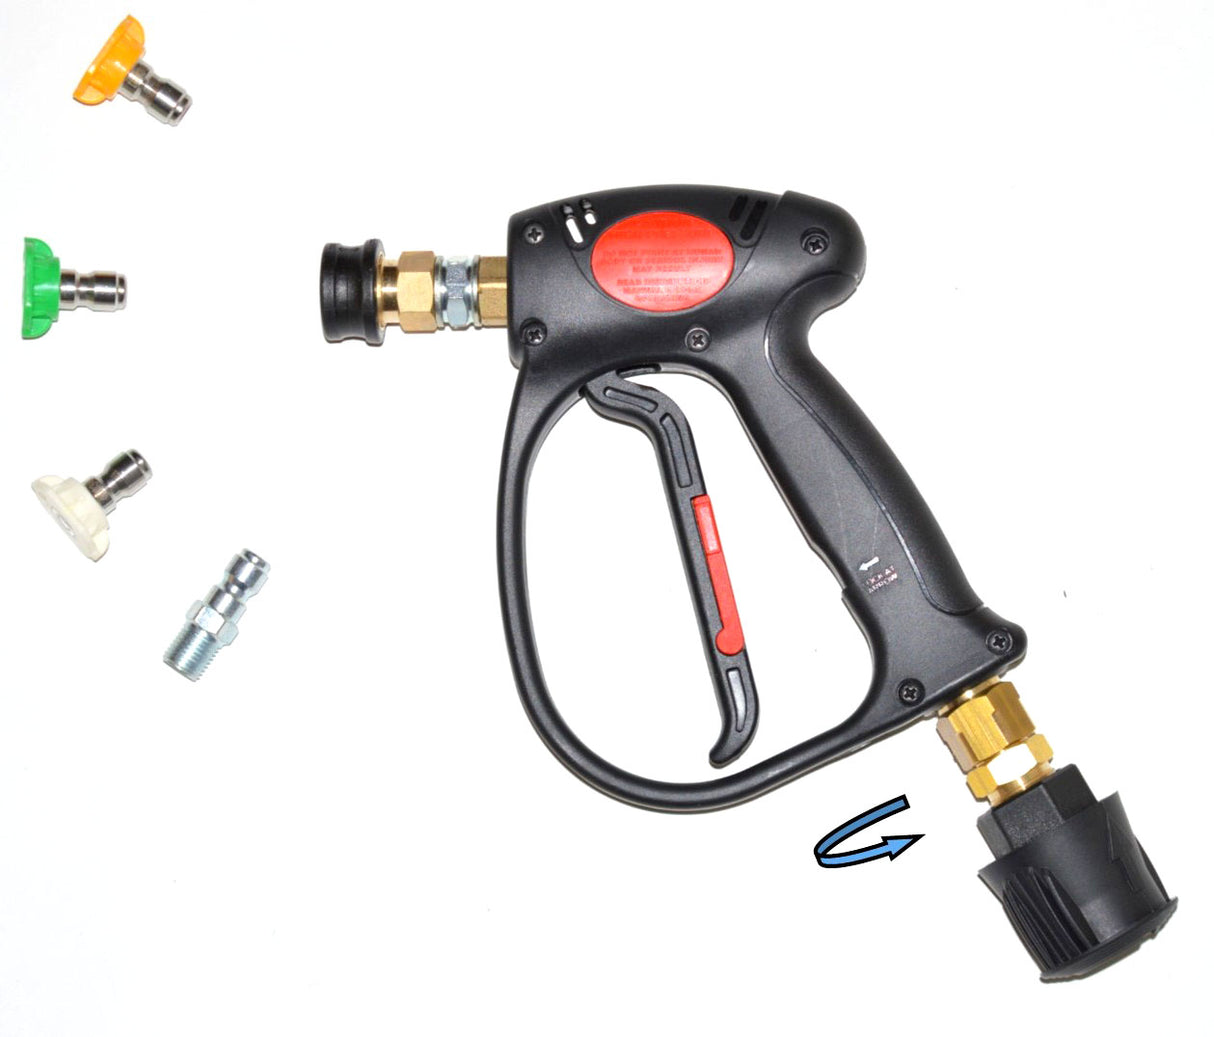 Nilfisk 'C' series Quick fit Short Trigger with Quick fit Nozzles & 5 mts Extension hose COMBO